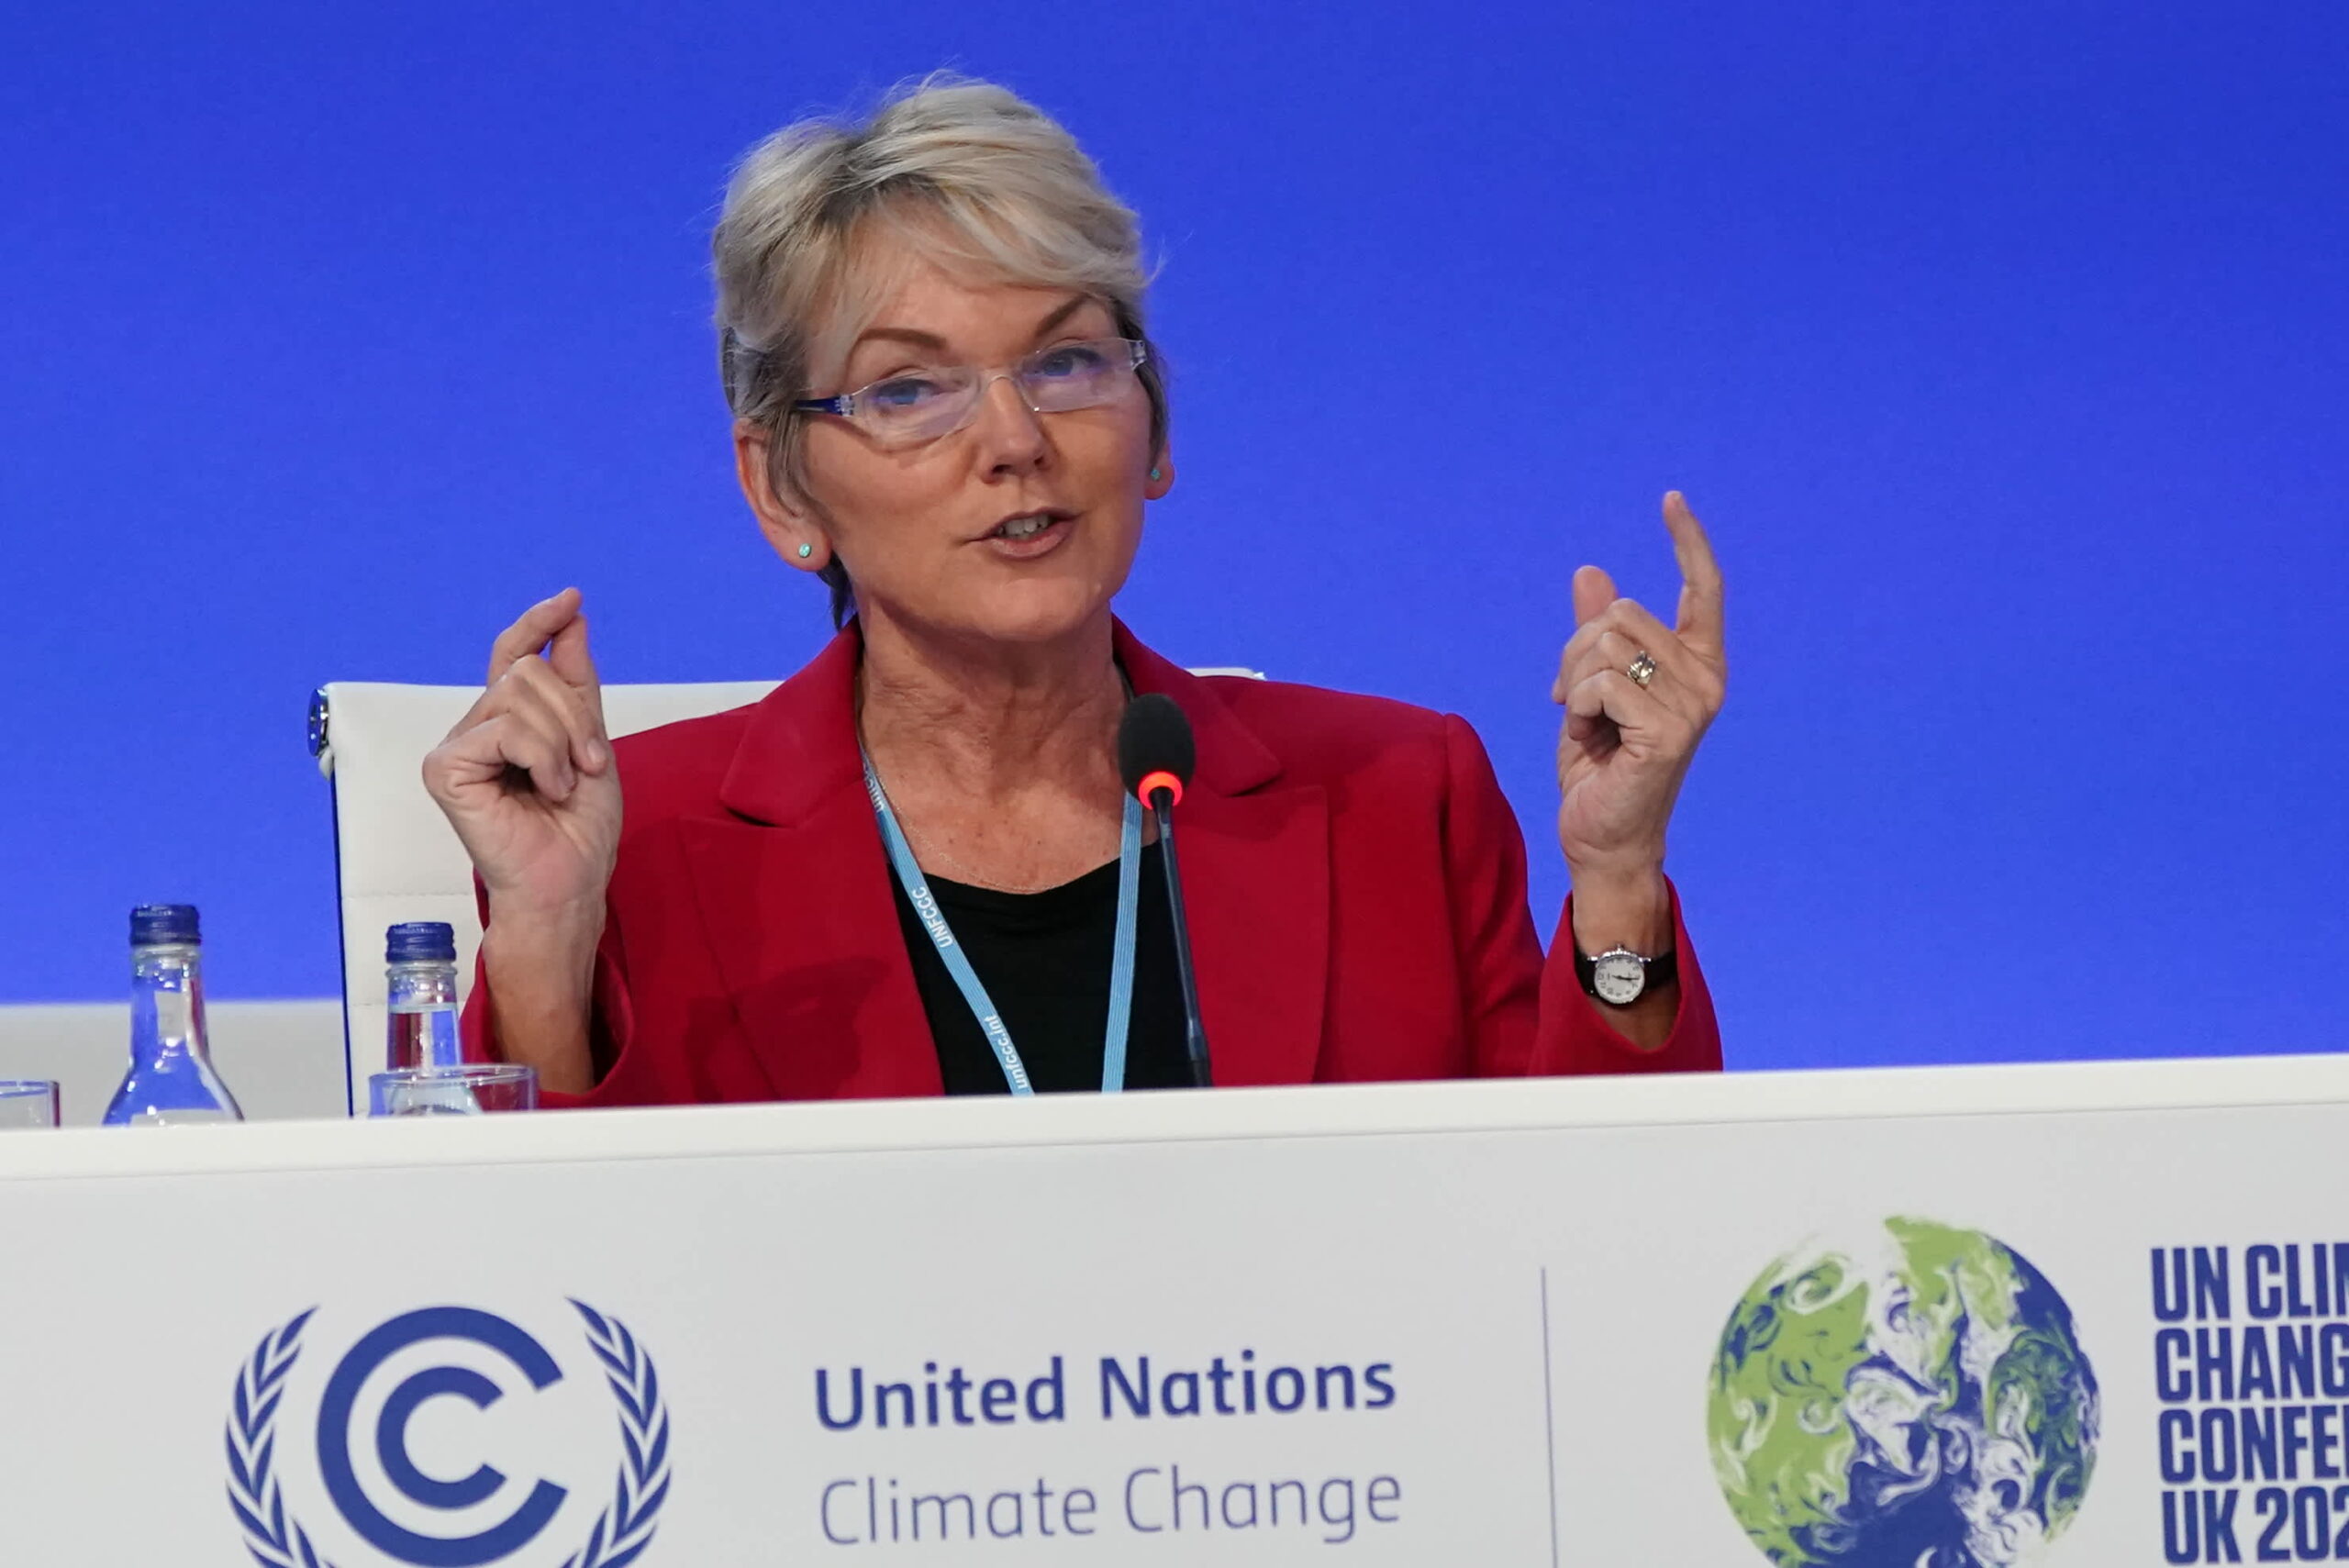 Energy crisis shows how world needs to wean off fossil fuels: Granholm